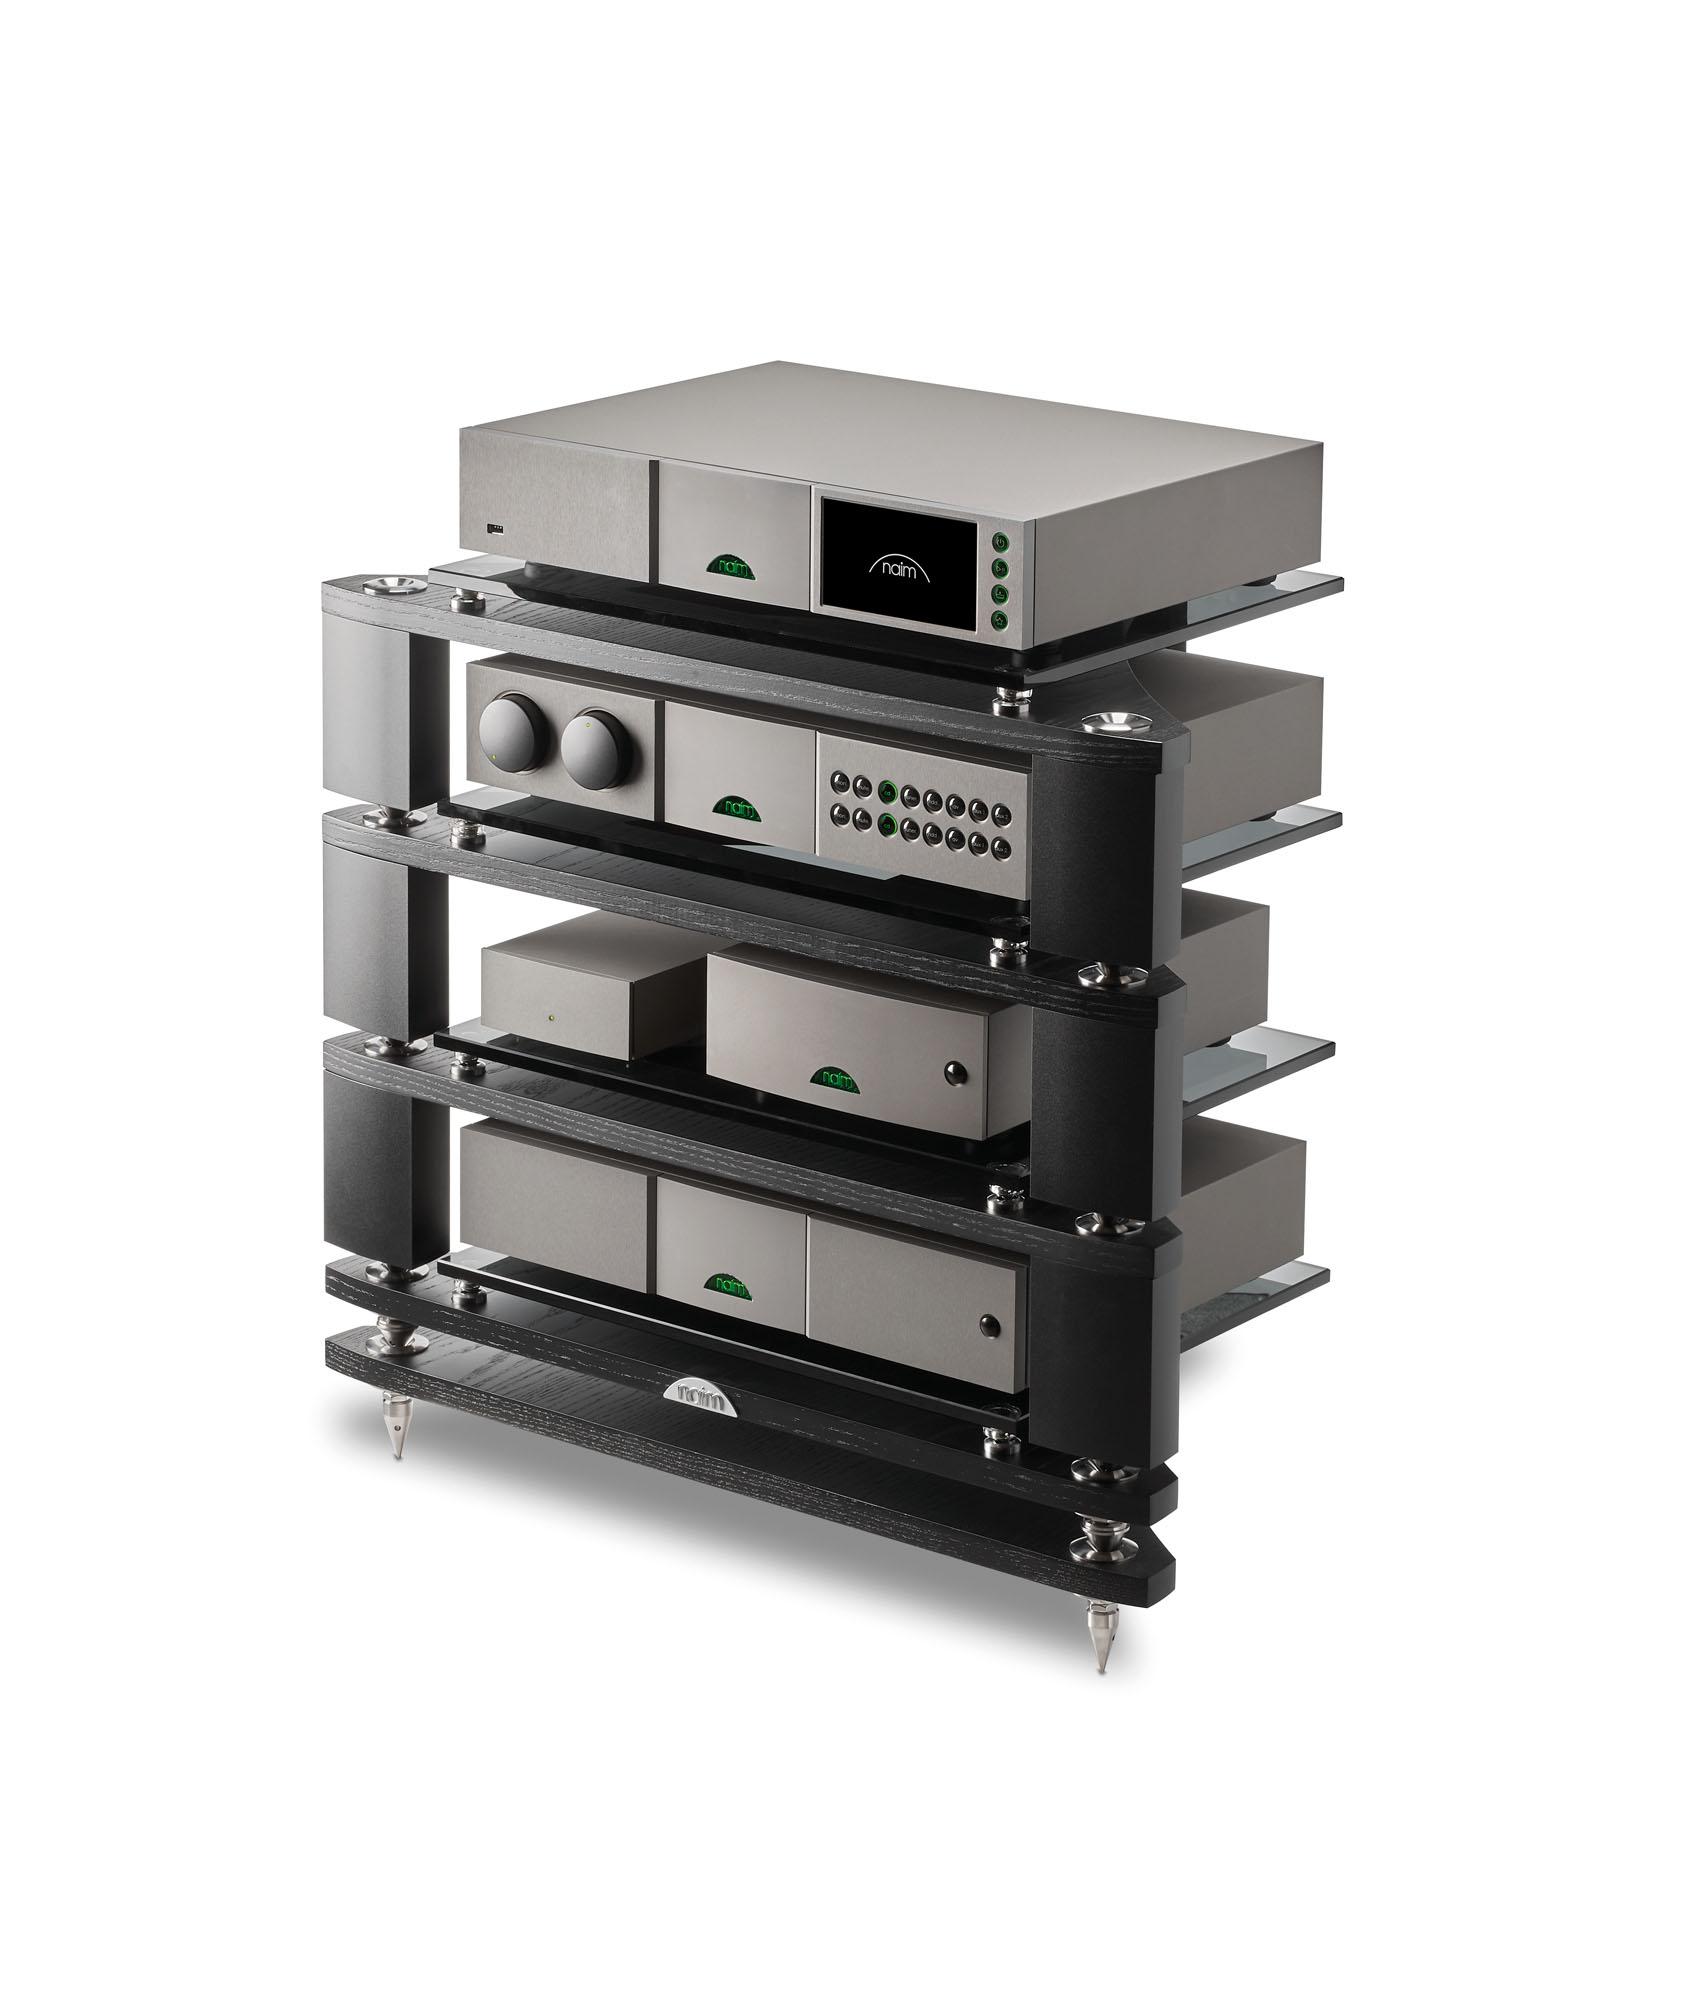 Marking ten years of Focal Naim collaboration with a system that celebrates synergy. d4a930e1 naim meuble 34 face